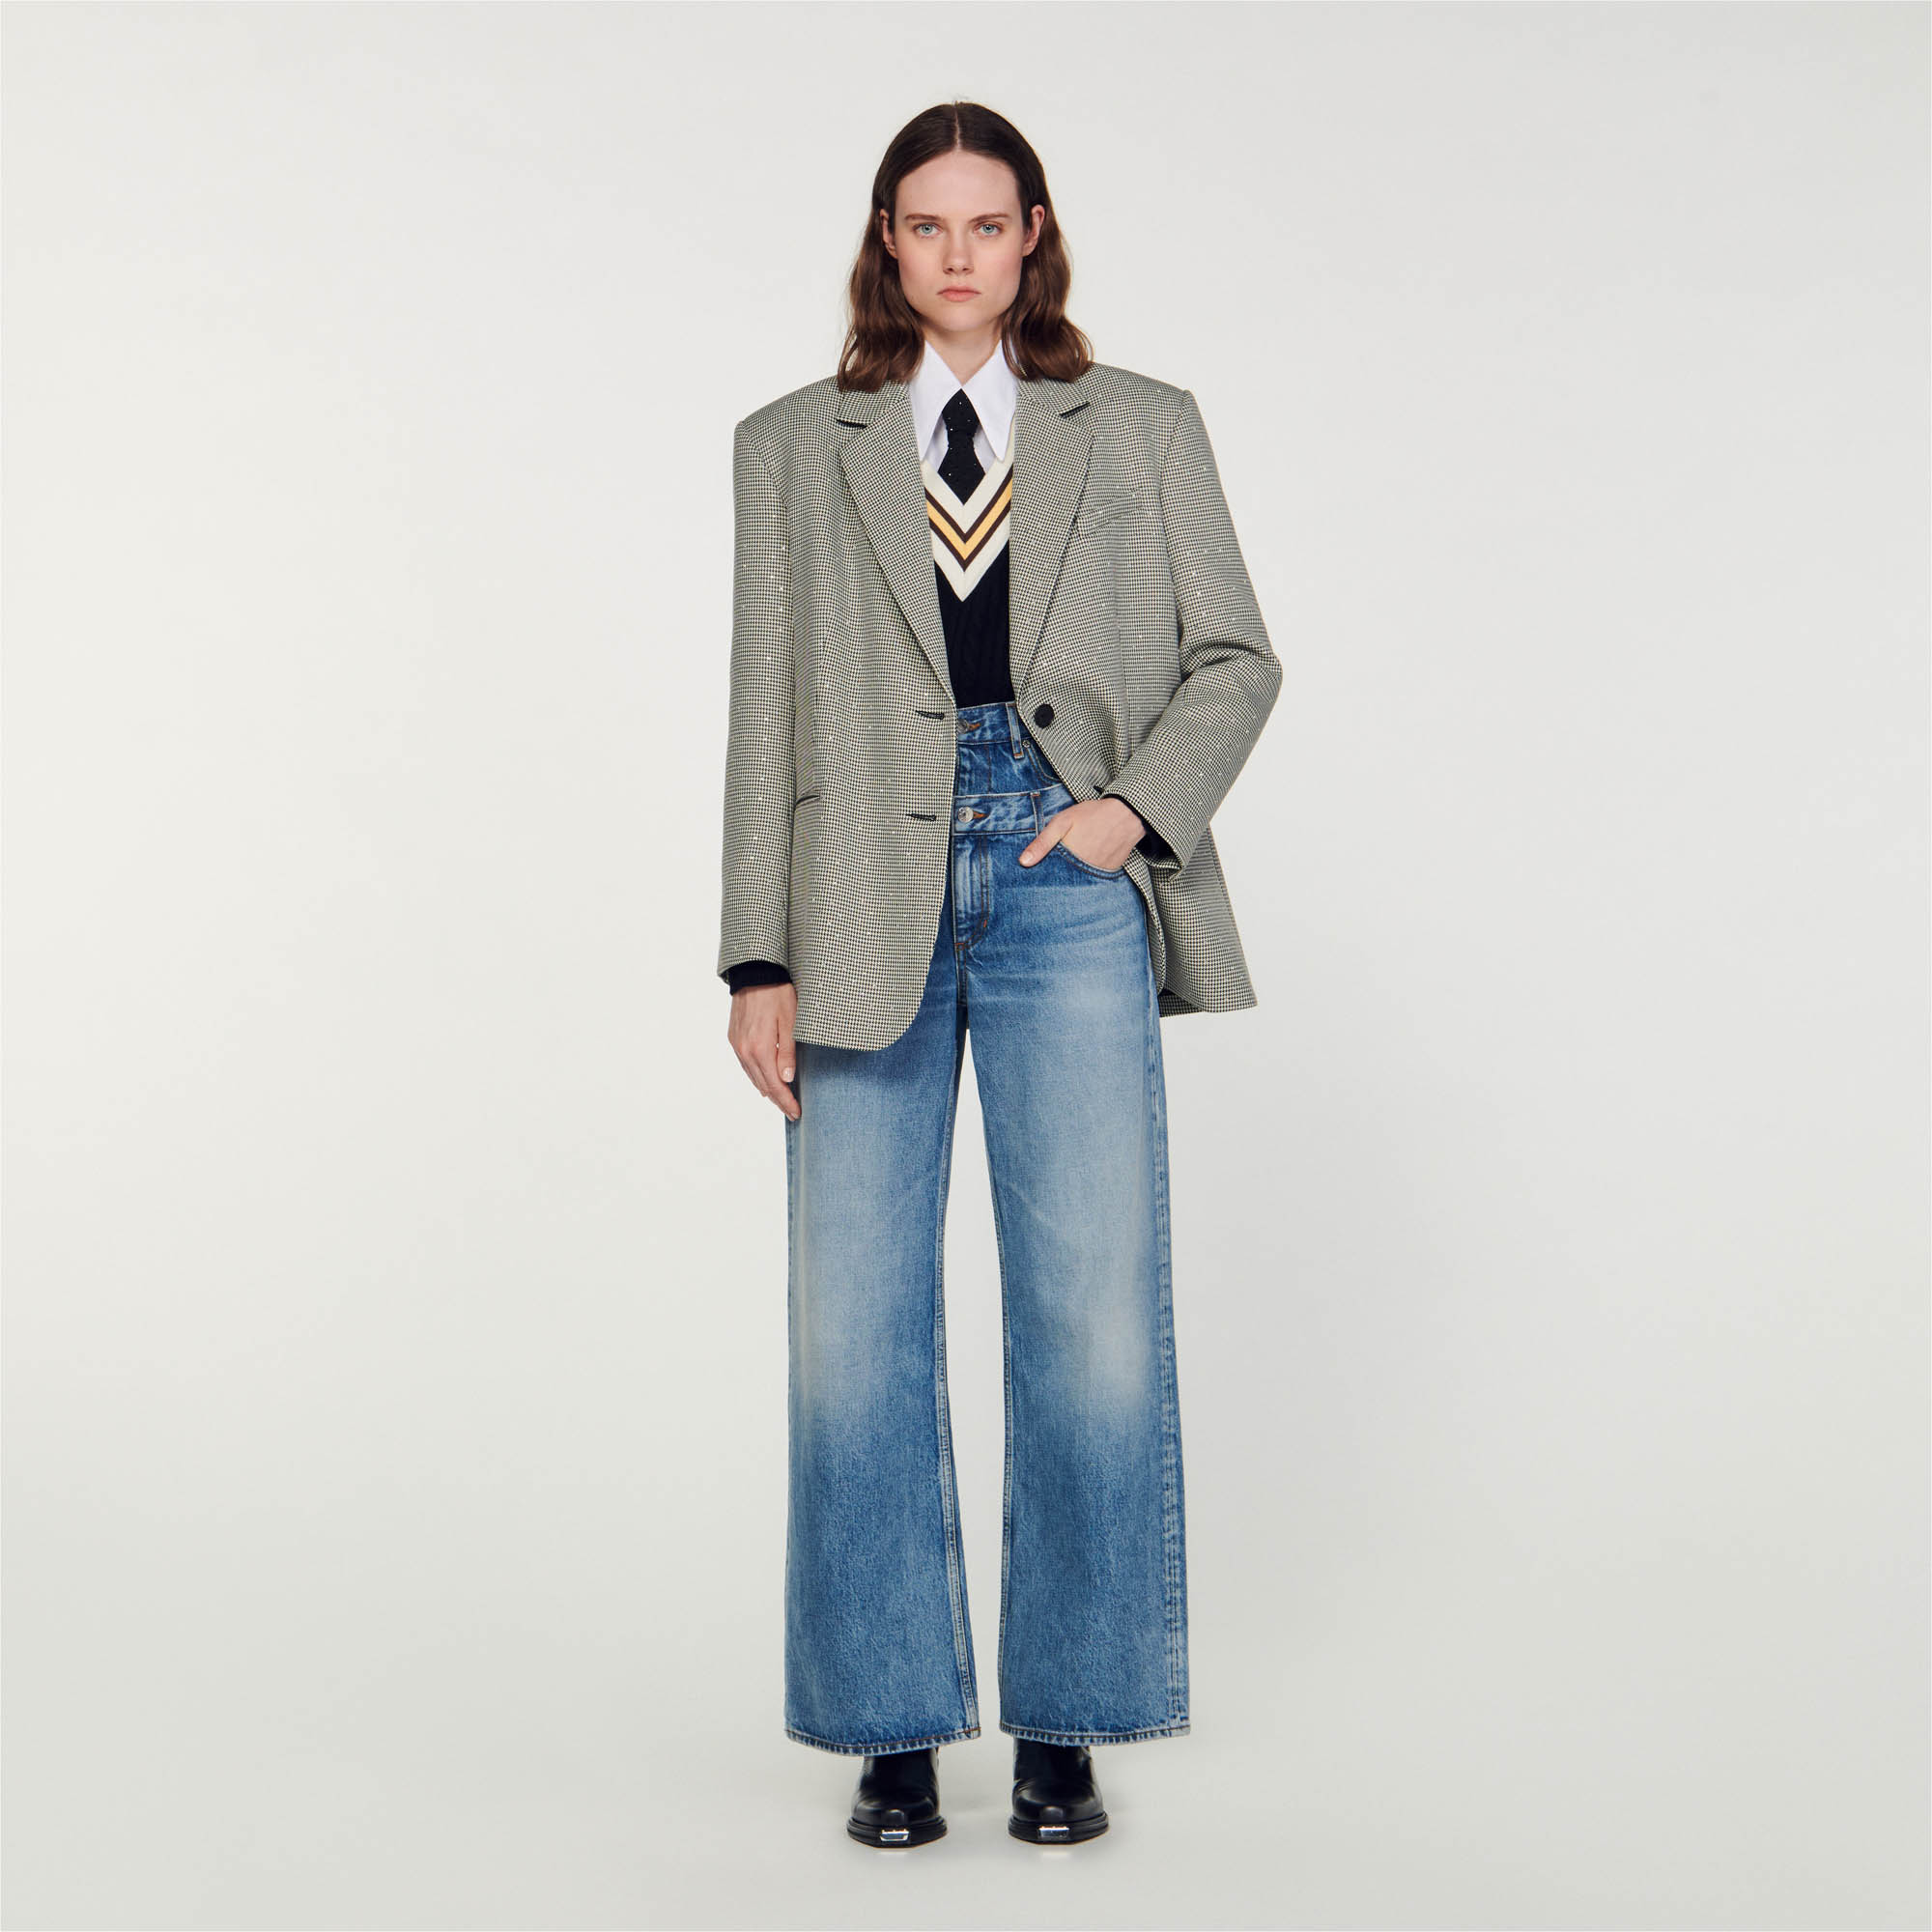 Sandro polyester Lining: Oversize blazer with houndstooth pattern, embellished with crystals, long sleeves, welt pockets and a double slit at the back